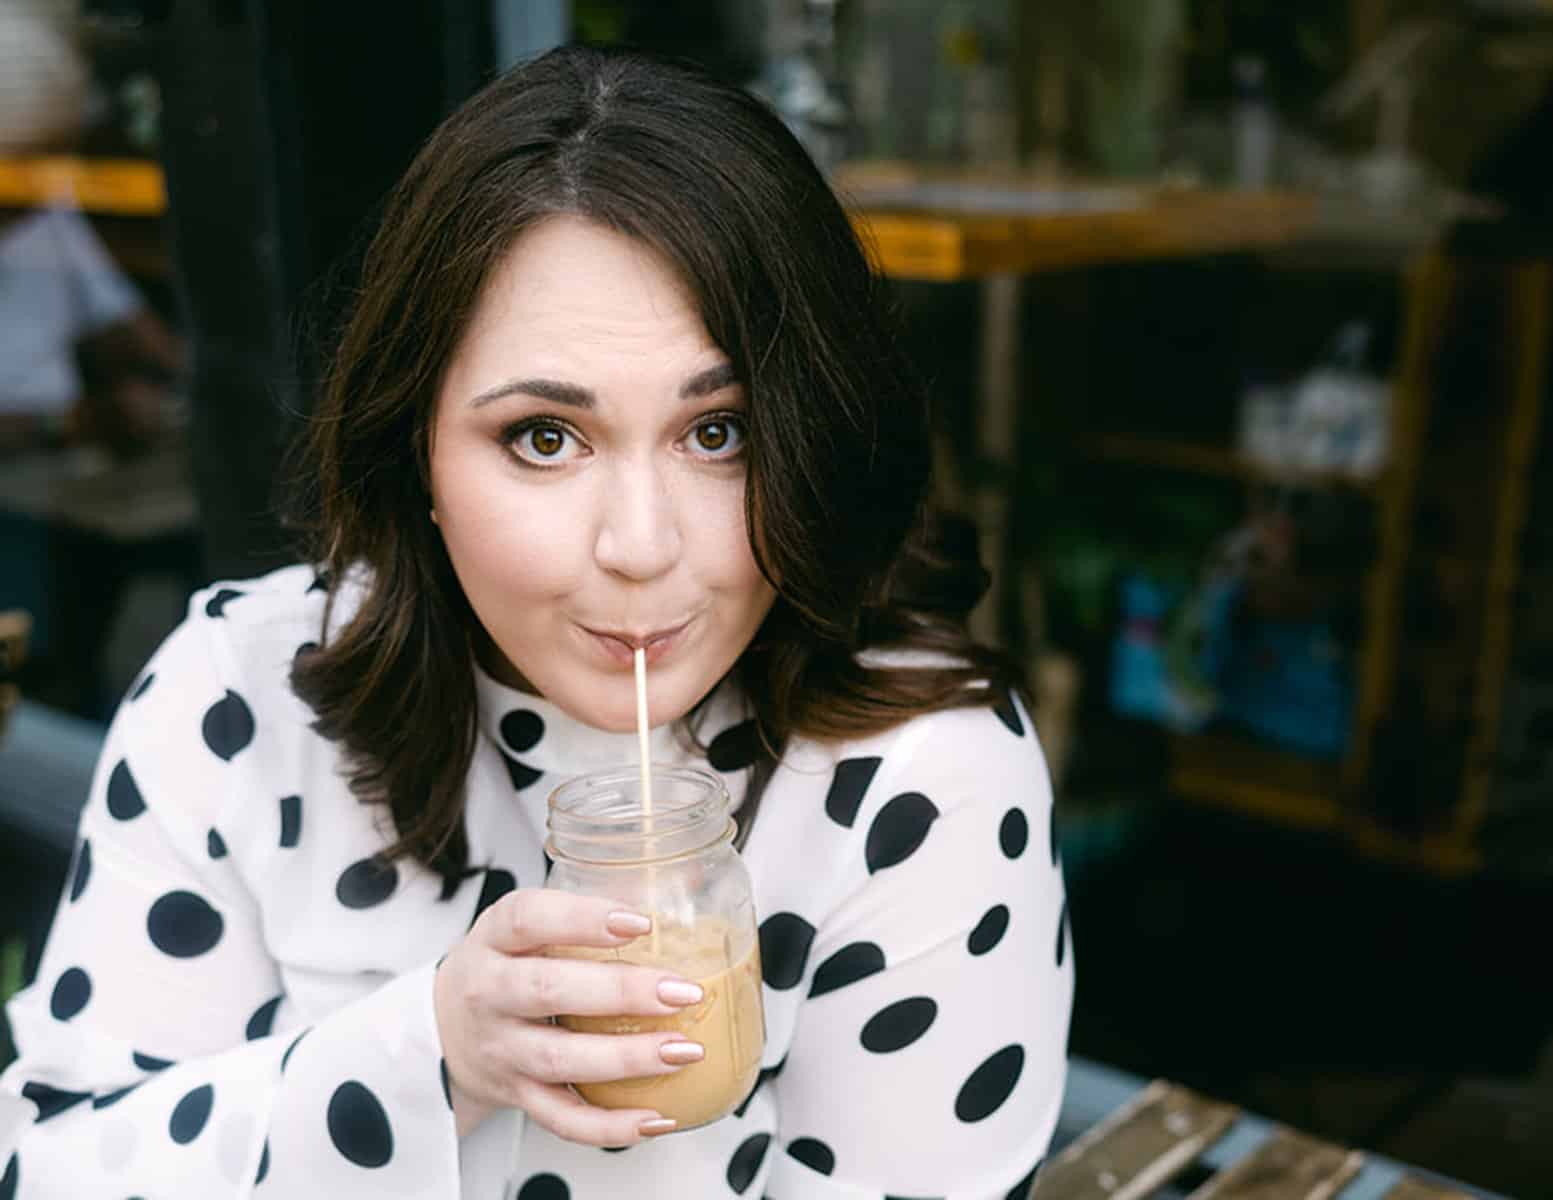 A woman in a polka dot shirt drinking a cup of coffee.